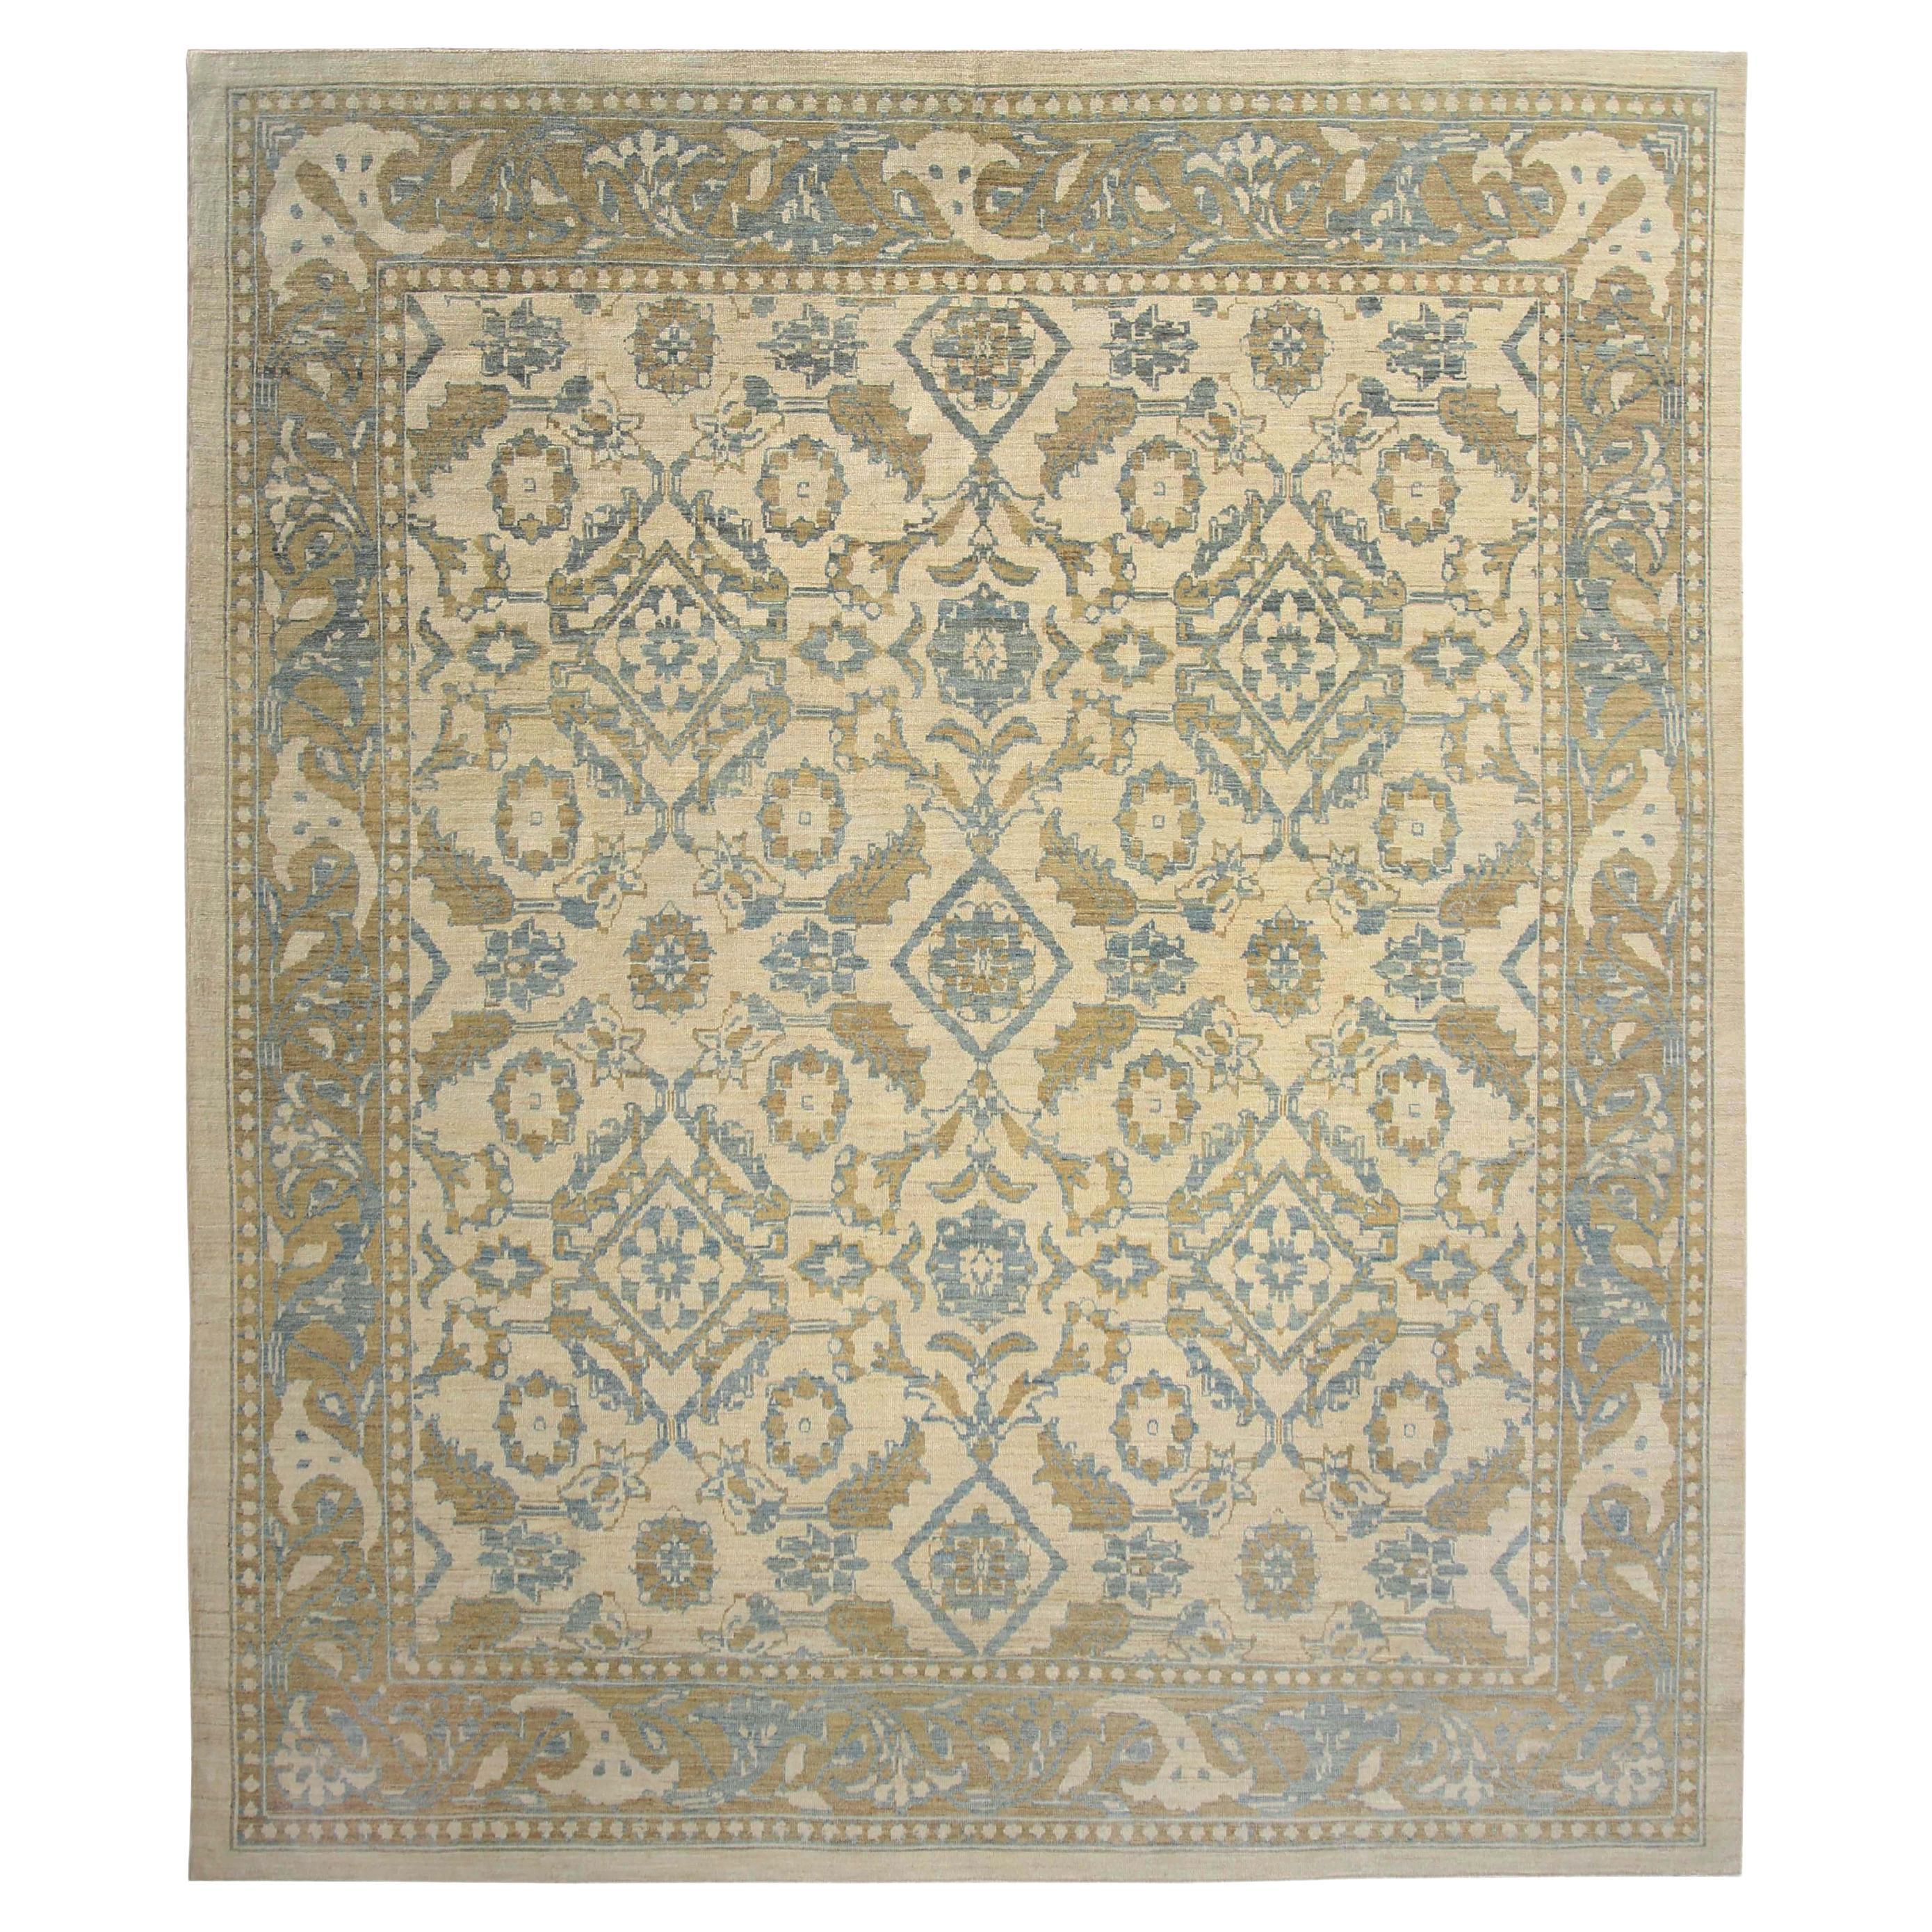 Luxurious Handmade Sultanabad Rug - Transitional Design, Blue, Green, and Yellow